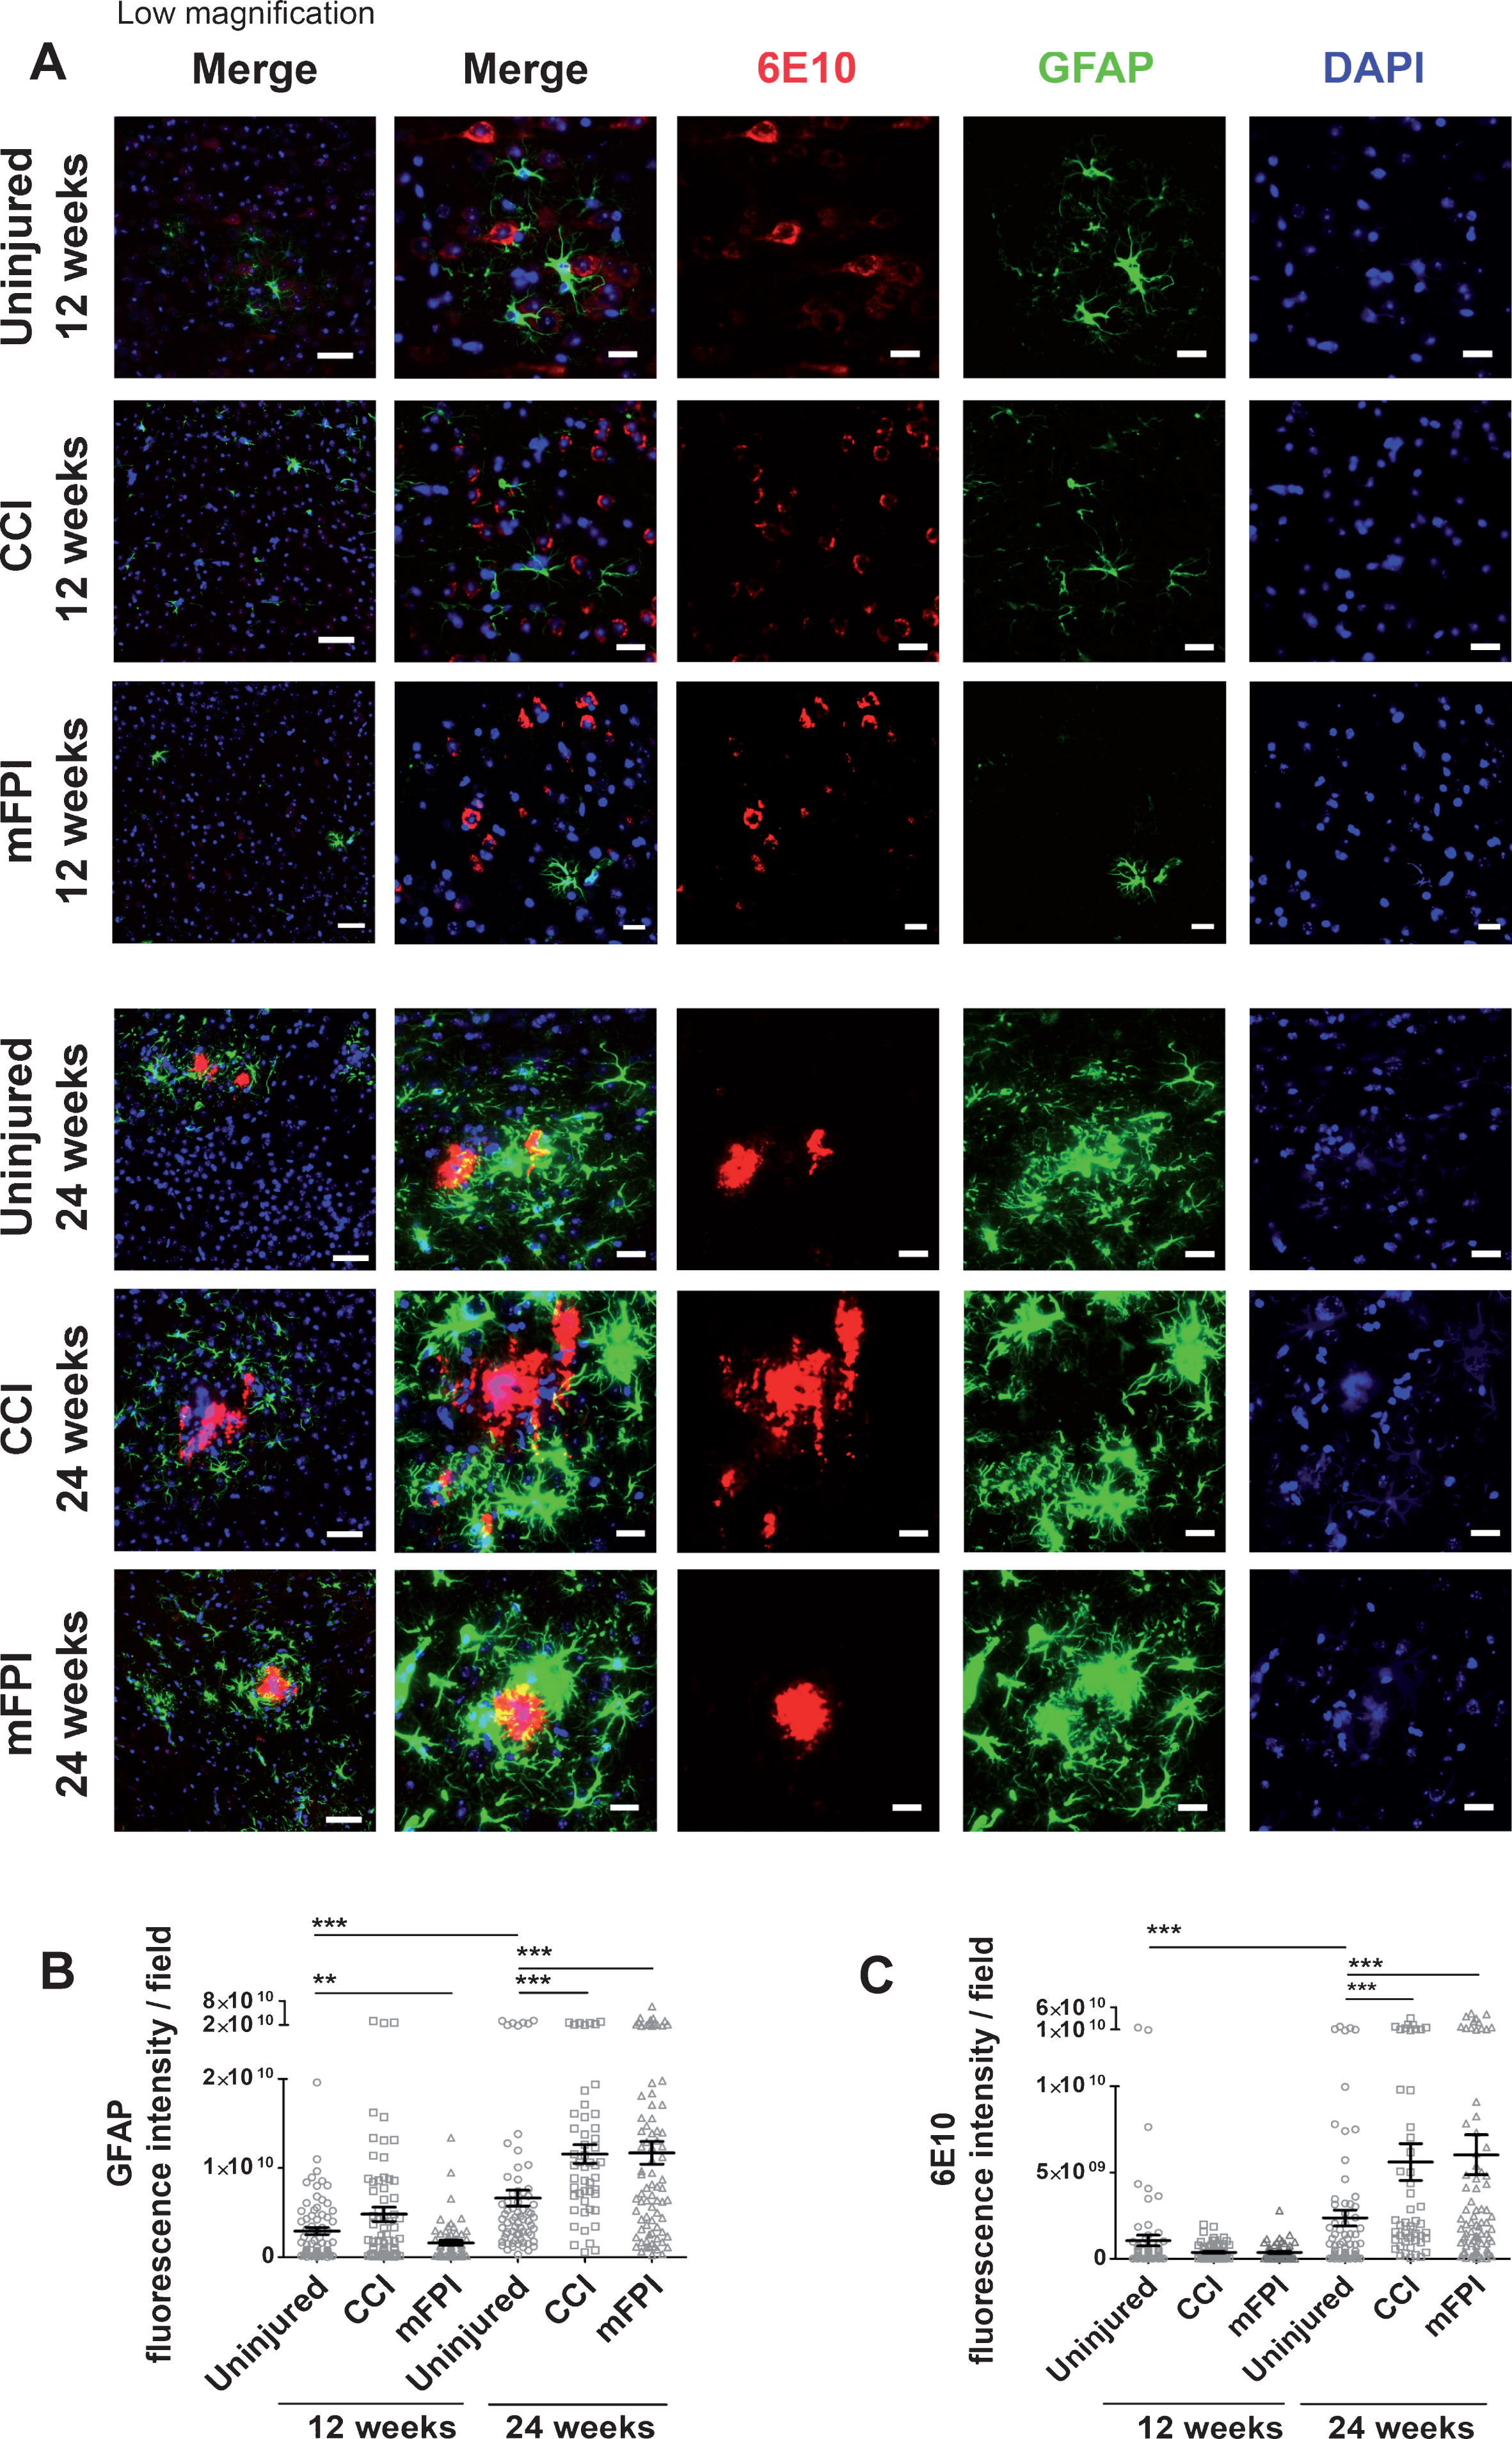 Elevated GFAP expression and Aβ deposition at 24 weeks following CCI or mFPI. Immunostainings, revealed that there was no significant increase in reactive astrocytes, GFAP (green) and Aβ deposits (6E10, red) in tg-ArcSwe mice at 12 weeks after CCI or mFPI. At24 weeks, there was a clear increase in both GFAP-expression and Aβ deposition in both injury groups at, compared to uninjured controls (A). Analysis of the fluorescence signal confirmed that there was a significant increase in GFAP-expression and Aβ deposition 24 weeks after CCI or mFPI (B-C). The data was analyzed by nonparametric Mann Whitney test and the graphs display mean±SEM. Scale bars: Low magnification = 20μm, high magnification = 50μm. **p < 0.01, ***p < 0.001.